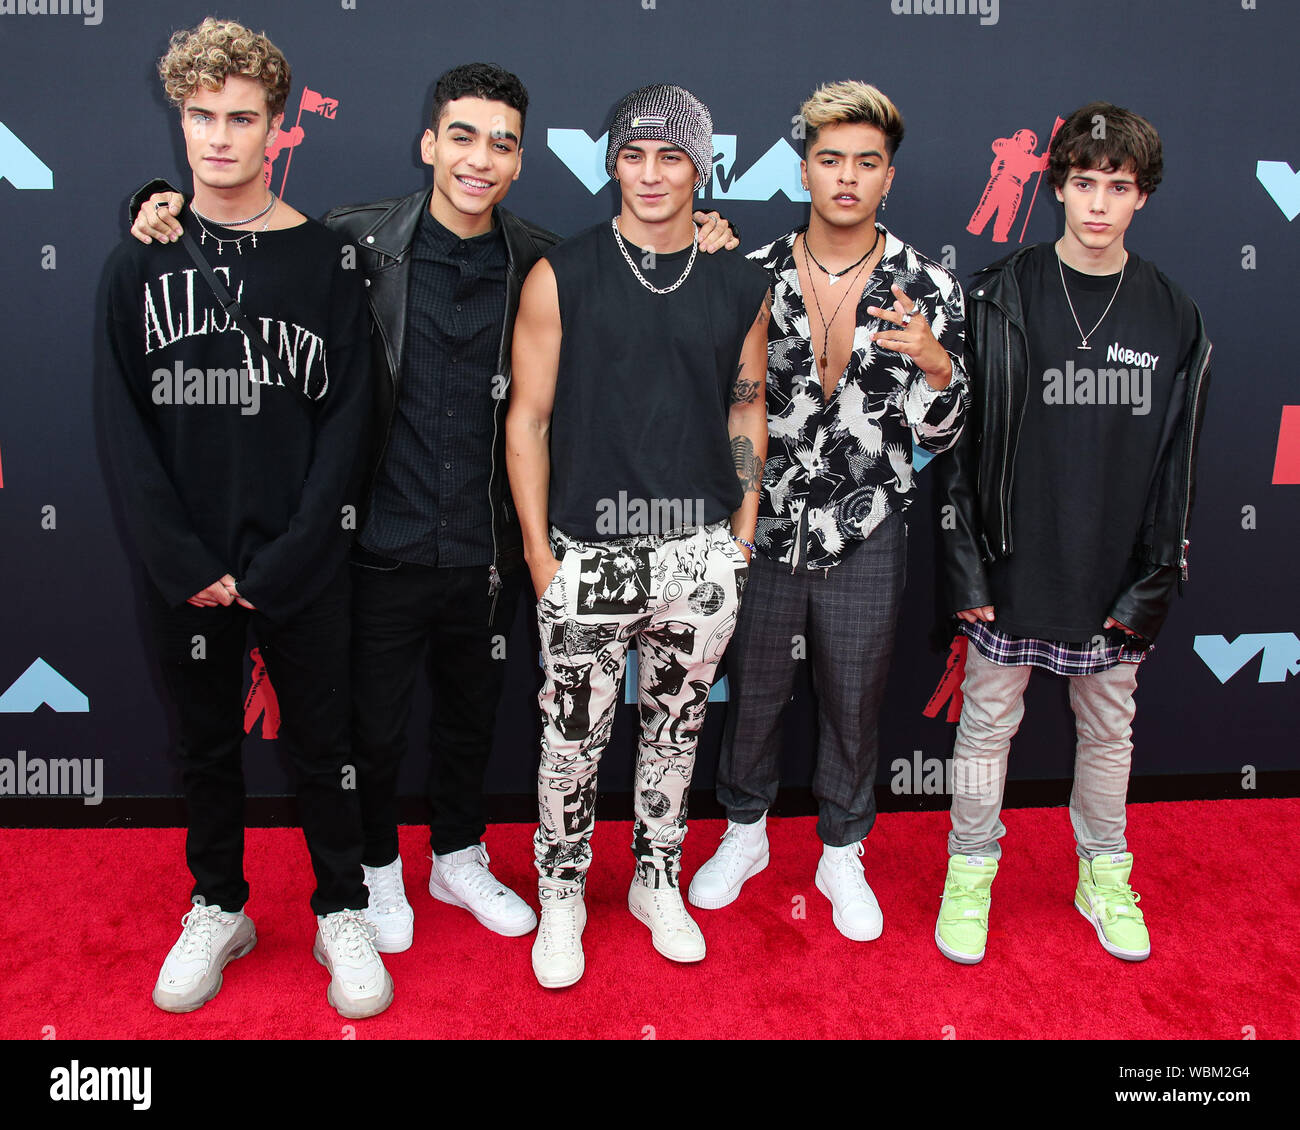 Newark, United States. 26th Aug, 2019. NEWARK, NEW JERSEY, USA - AUGUST 26: Brady Tutton, Drew Ramos, Chance Perez, Sergio Calderon and Conor Smith of In Real Life arrive at the 2019 MTV Video Music Awards held at the Prudential Center on August 26, 2019 in Newark, New Jersey, United States. (Photo by Xavier Collin/Image Press Agency) Credit: Image Press Agency/Alamy Live News Credit: Image Press Agency/Alamy Live News Stock Photo